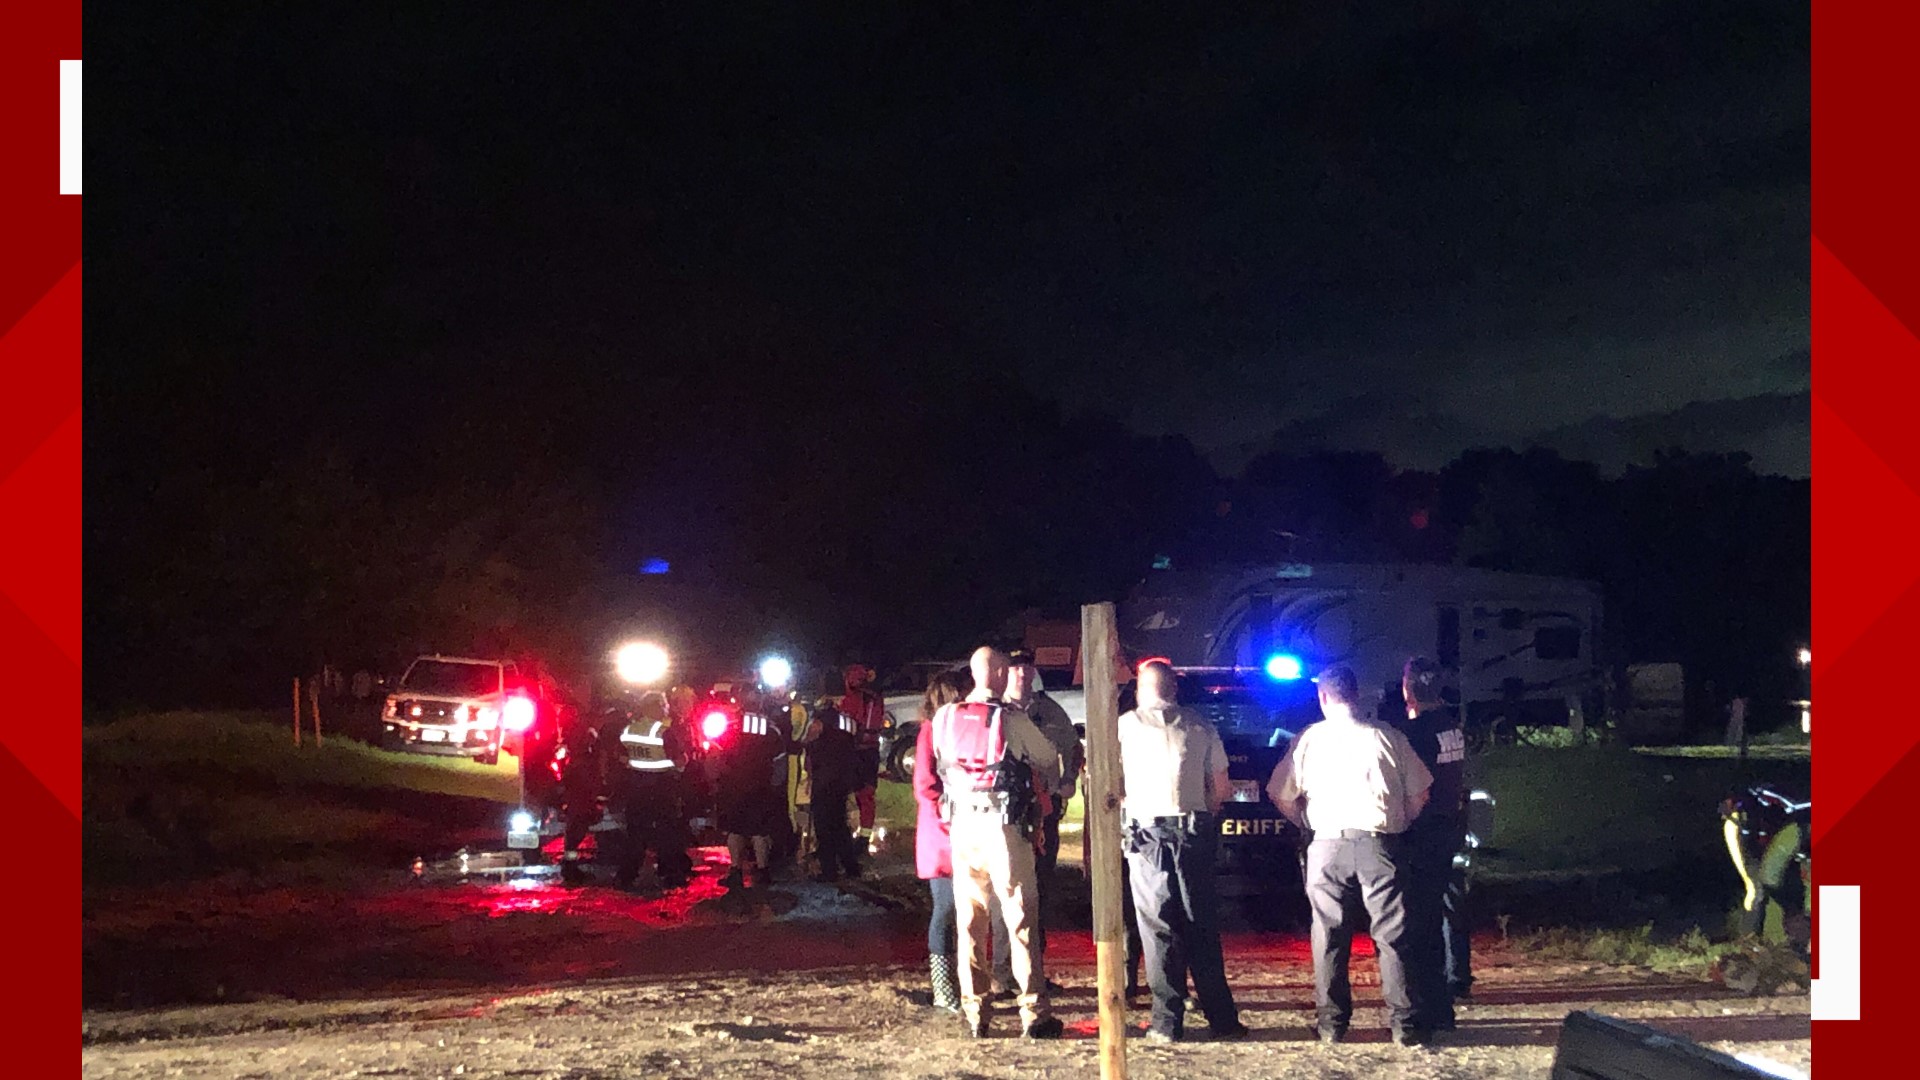 The Waco Fire Department sent units to Waco RV Park to save people stuck in flooded trailers Wednesday night. Six people were rescued, and nine people will be sheltered.